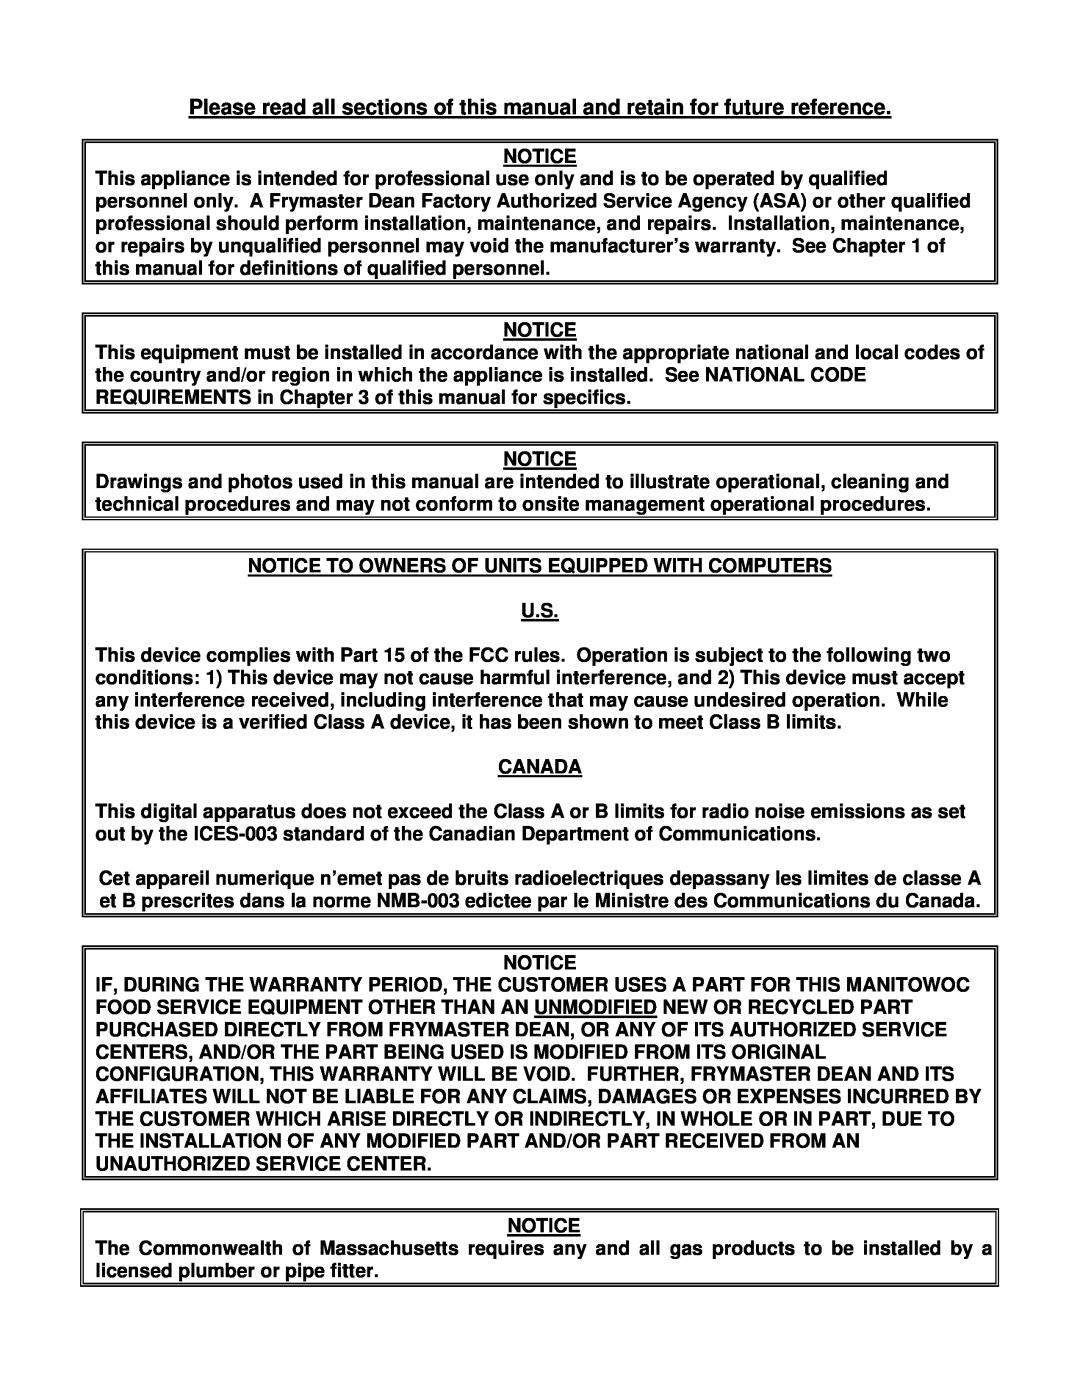 Frymaster HD21814150G, HD21814G, HD1814G operation manual Notice To Owners Of Units Equipped With Computers U.S, Canada 